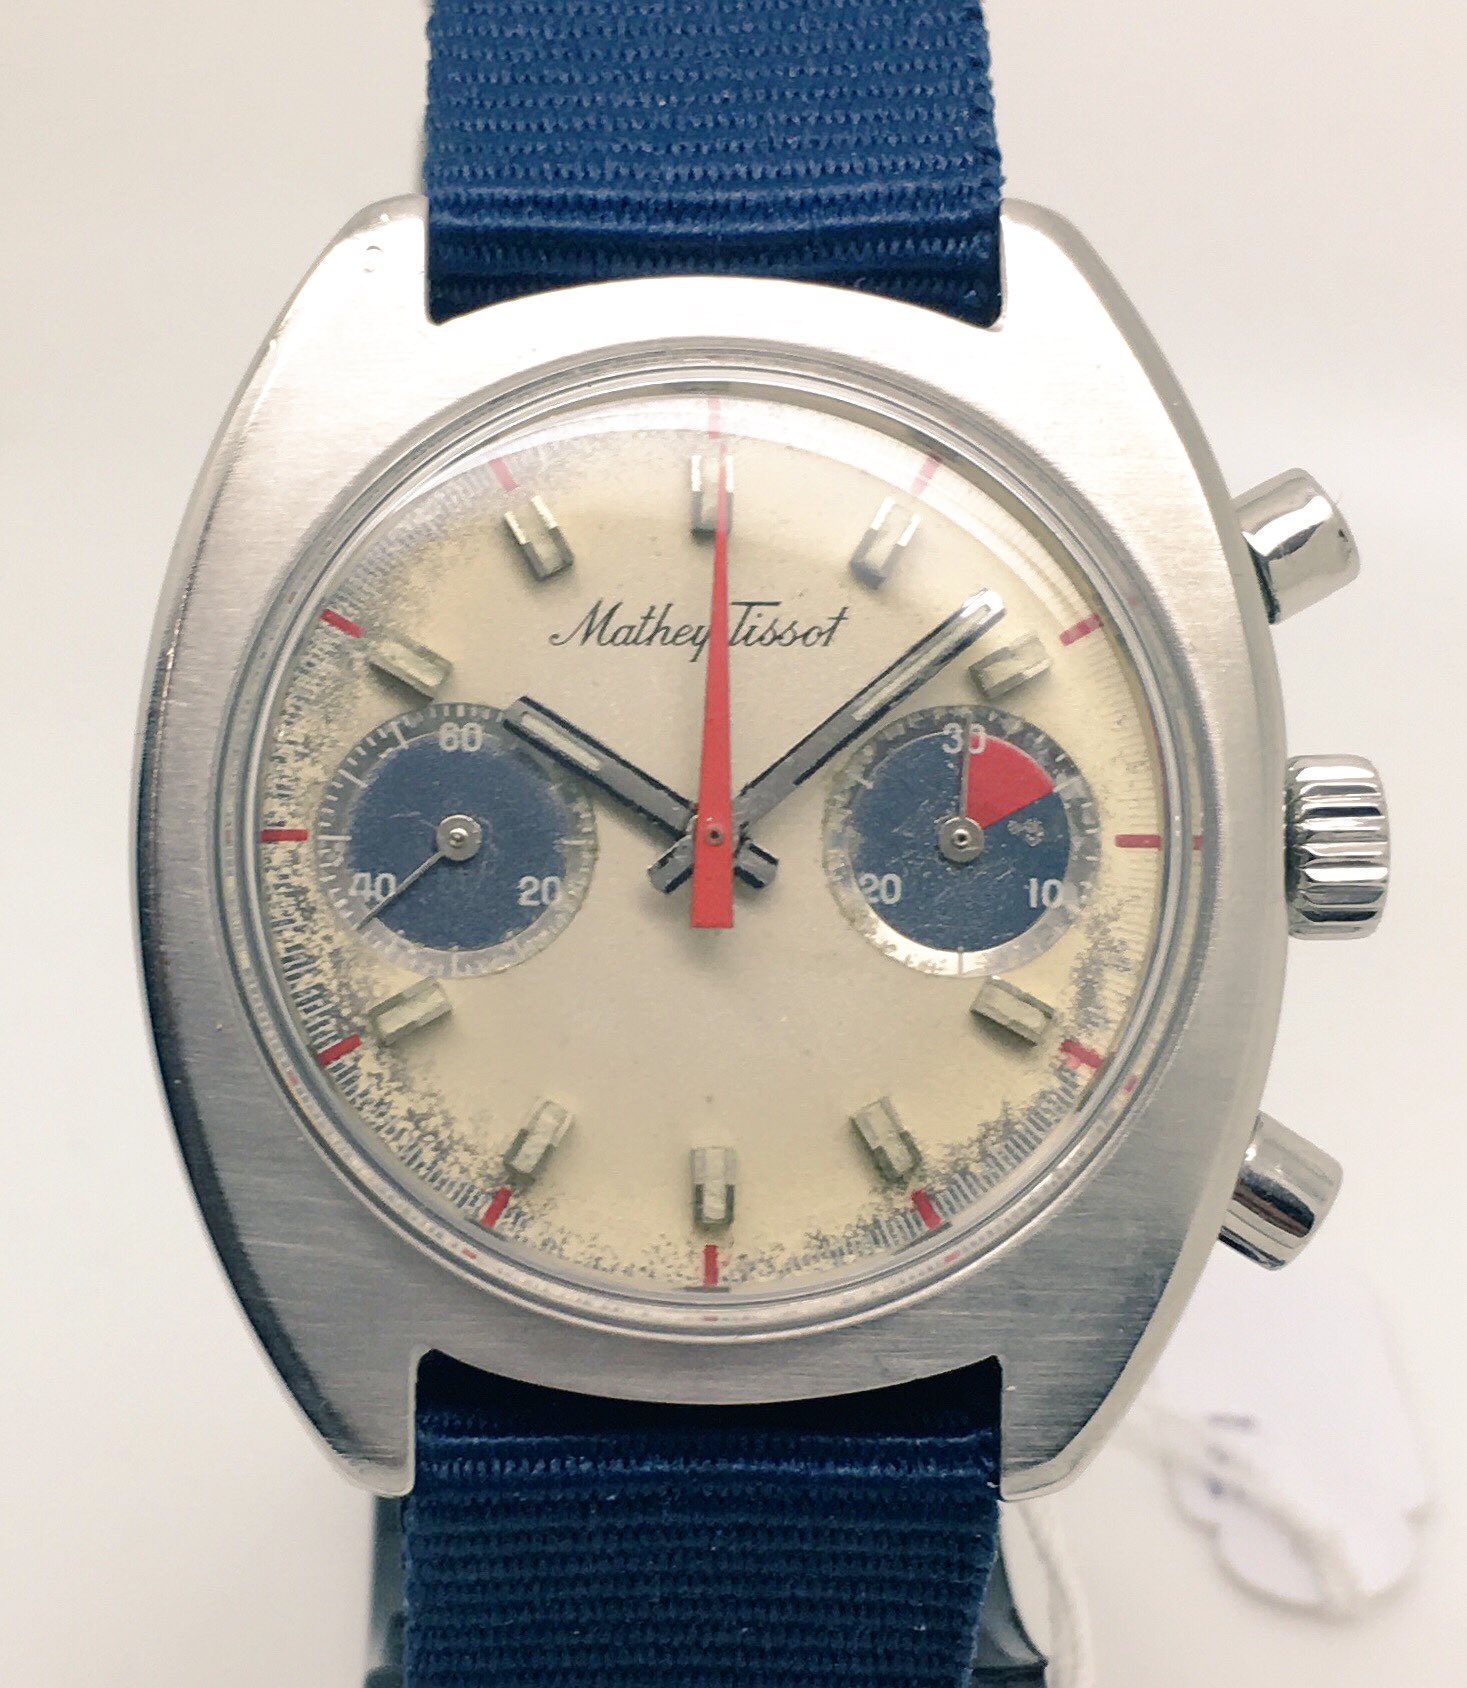 Vintage Watches on Twitter: "Mathey-Tissot Chronograph. Available…